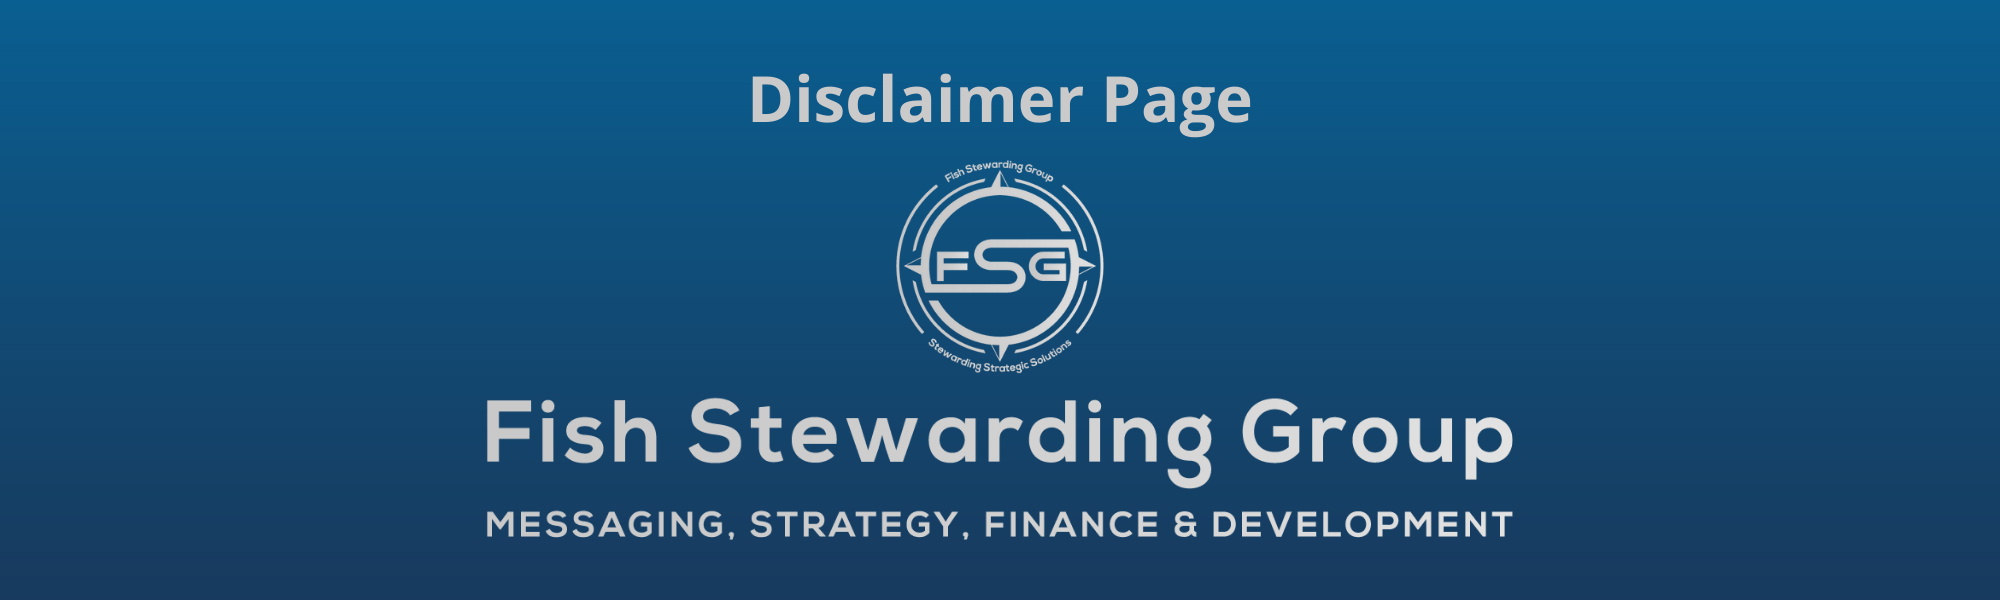 A thin rectangular Footer graphic for the Disclaimer Page page. The background is a blue gradient color that goes from a dark blue on the bottom to a lighter blue on top. The text in gray on top reads Disclaimer Page and FAQs. The text in gray on the bottom center reads: Fish Stewarding Group and beneath that, the text reads Messaging, Strategy, Finance and Development. In the center above the text is the FSG logo in gray. The logo has the letters FSG in the middle with a circle with four pointed arrows facing north, south, east and west with the S connected to that circle. Four rounded lines make the next circle of the circle and the last layer is a thin circle with the text on the Bottom that reads Stewarding Strategist Solutions and on top, the text reads Fish Stewarding Group.